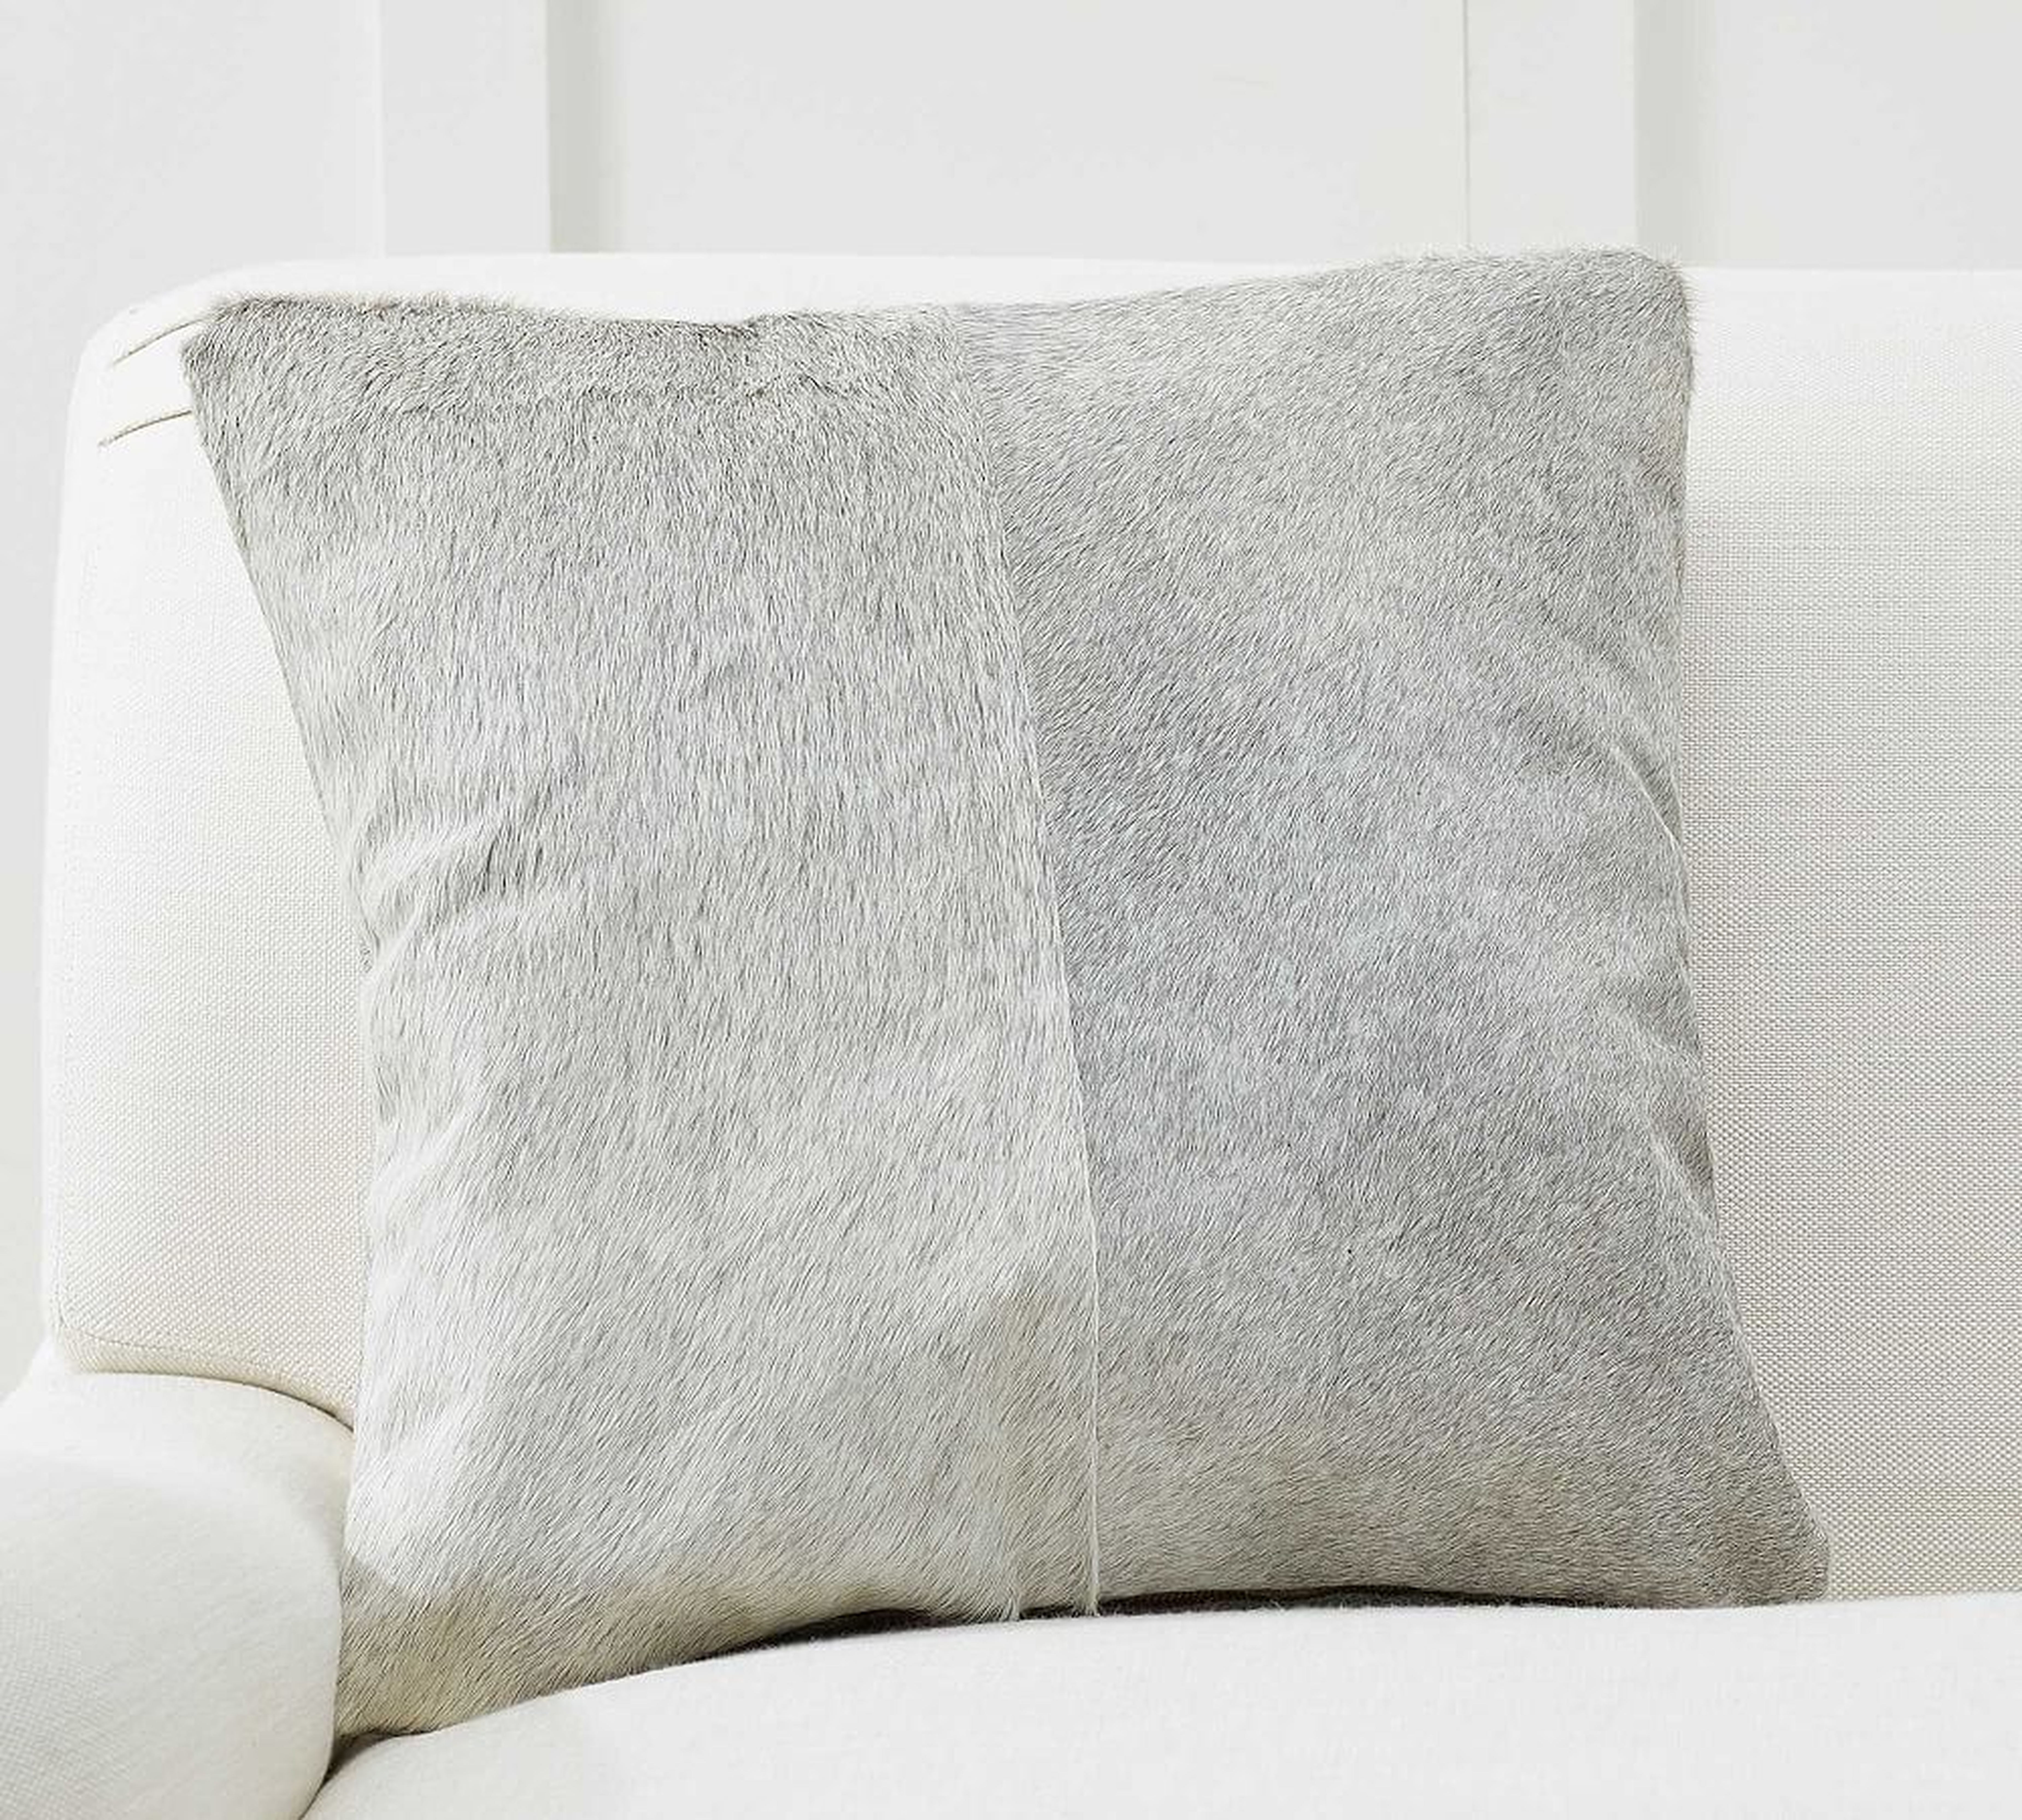 Hair on Hide Pillow Cover, 20 x 20", Gray - Pottery Barn